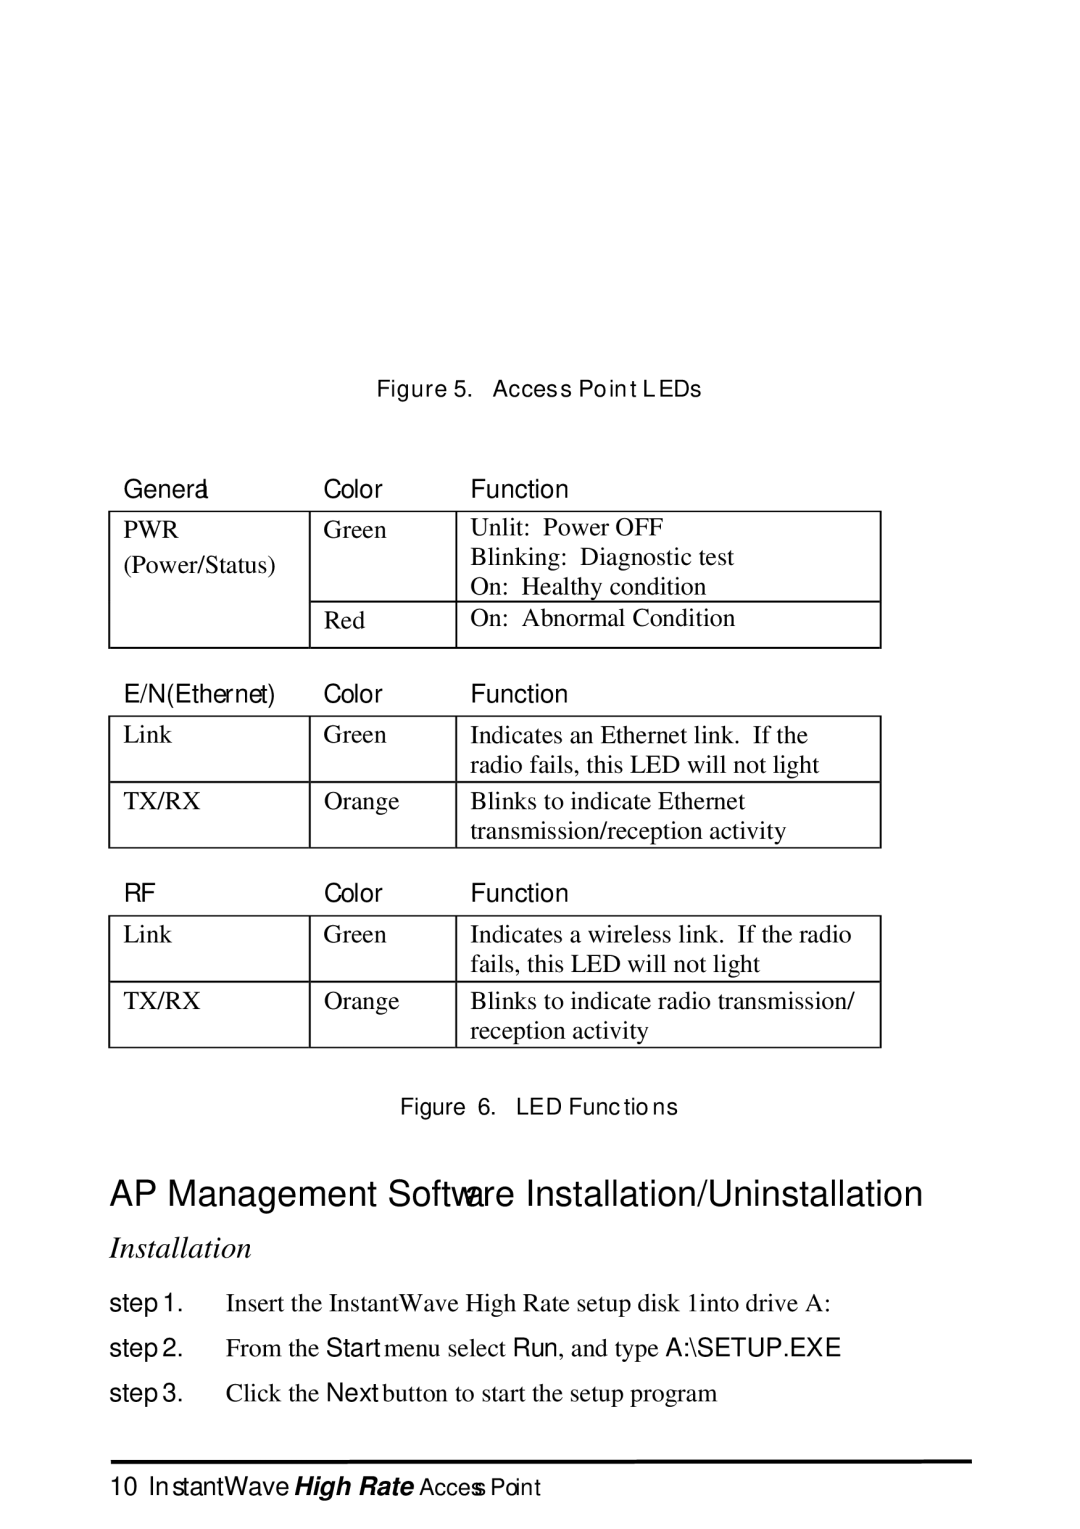 NDC comm Instant Wave manual AP Management Software Installation/Uninstallation 